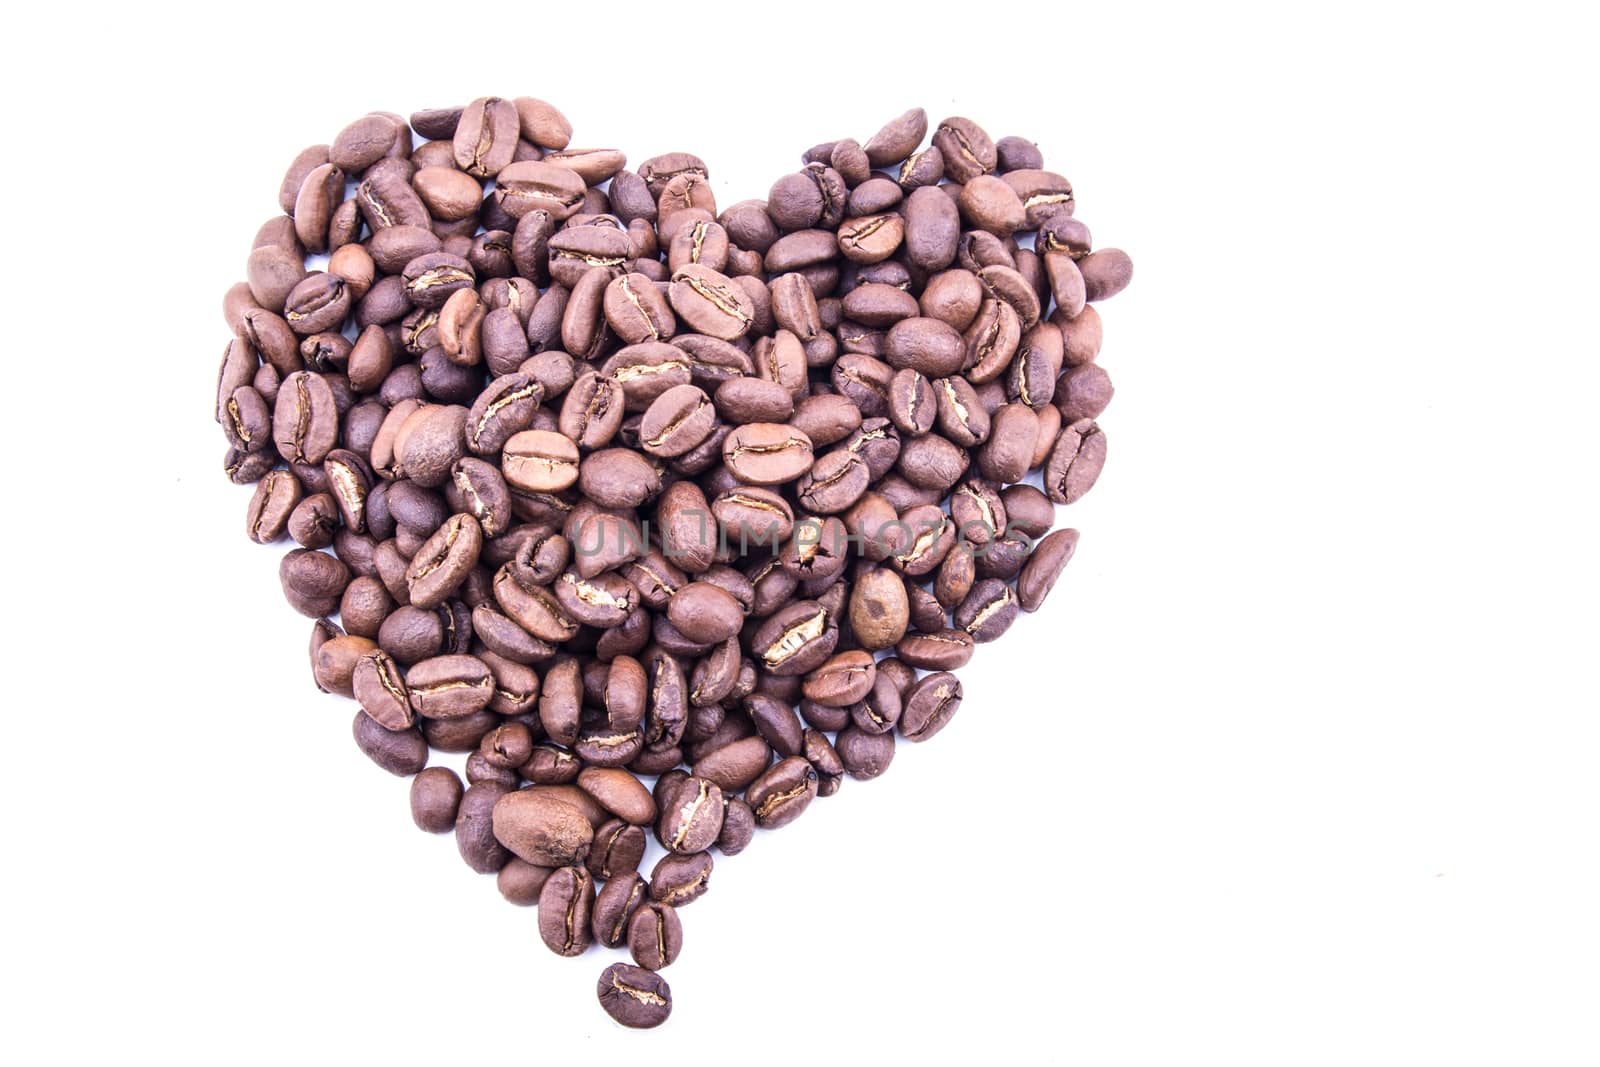 the pile of hearth coffee bean on the white background